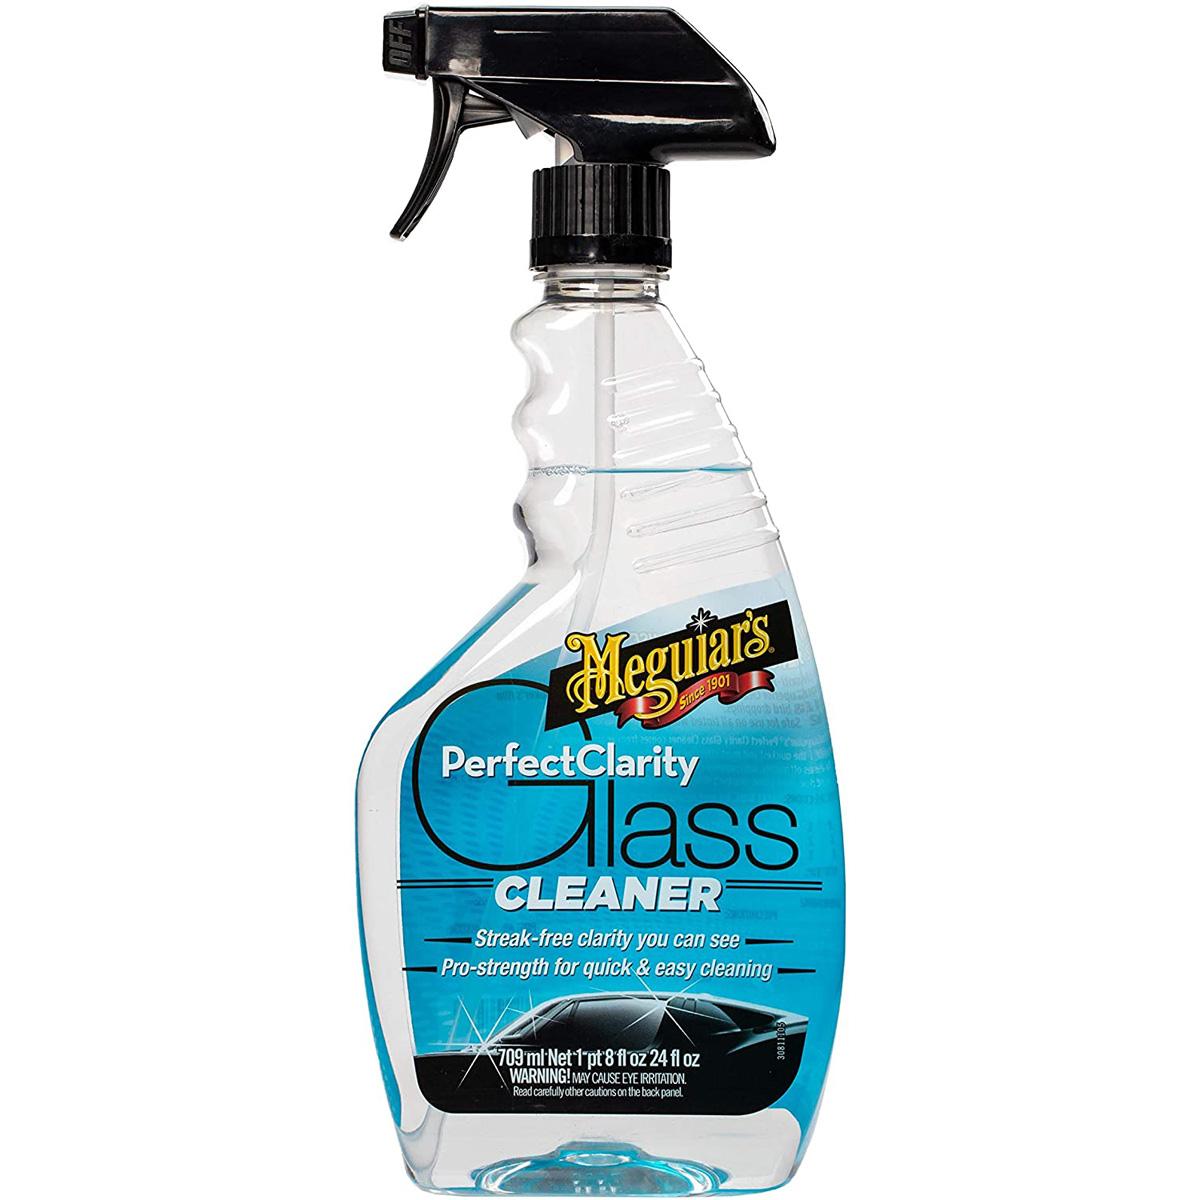 Meguiars Perfect Clarity Glass Cleaner Spray for $4.11